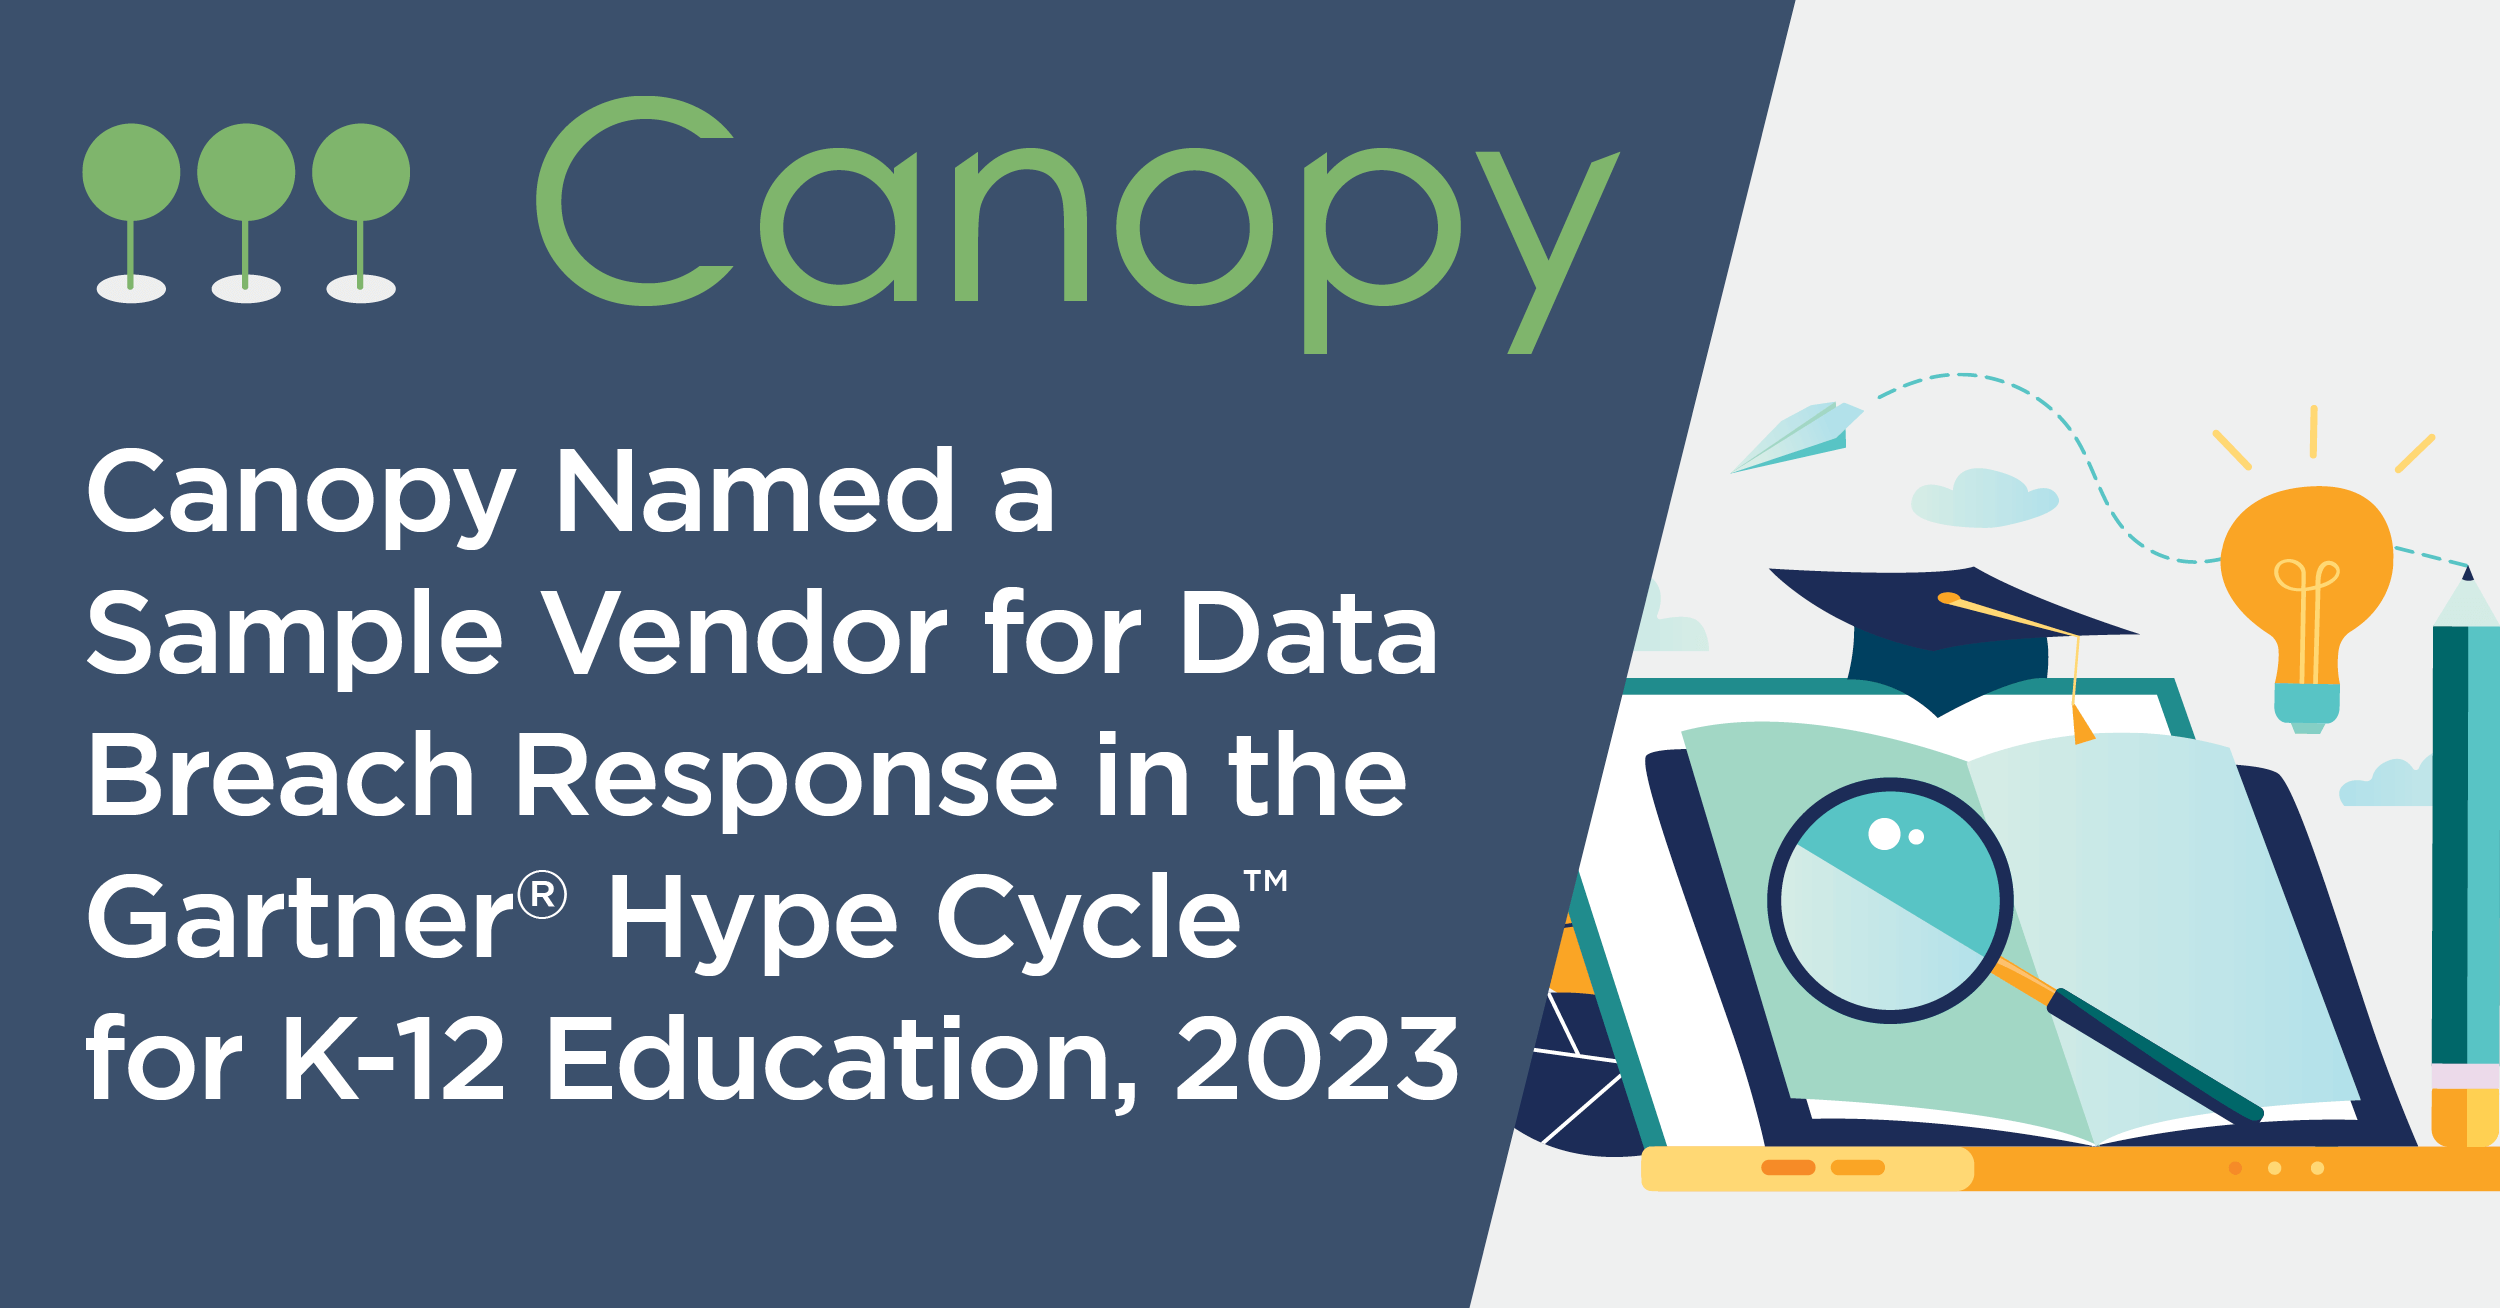 Canopy logo and title text - Canopy a Sample Vendor for Data Breach Response in Fourth 2023 Gartner Hype Cycle - with education computer, books, and graduation cap